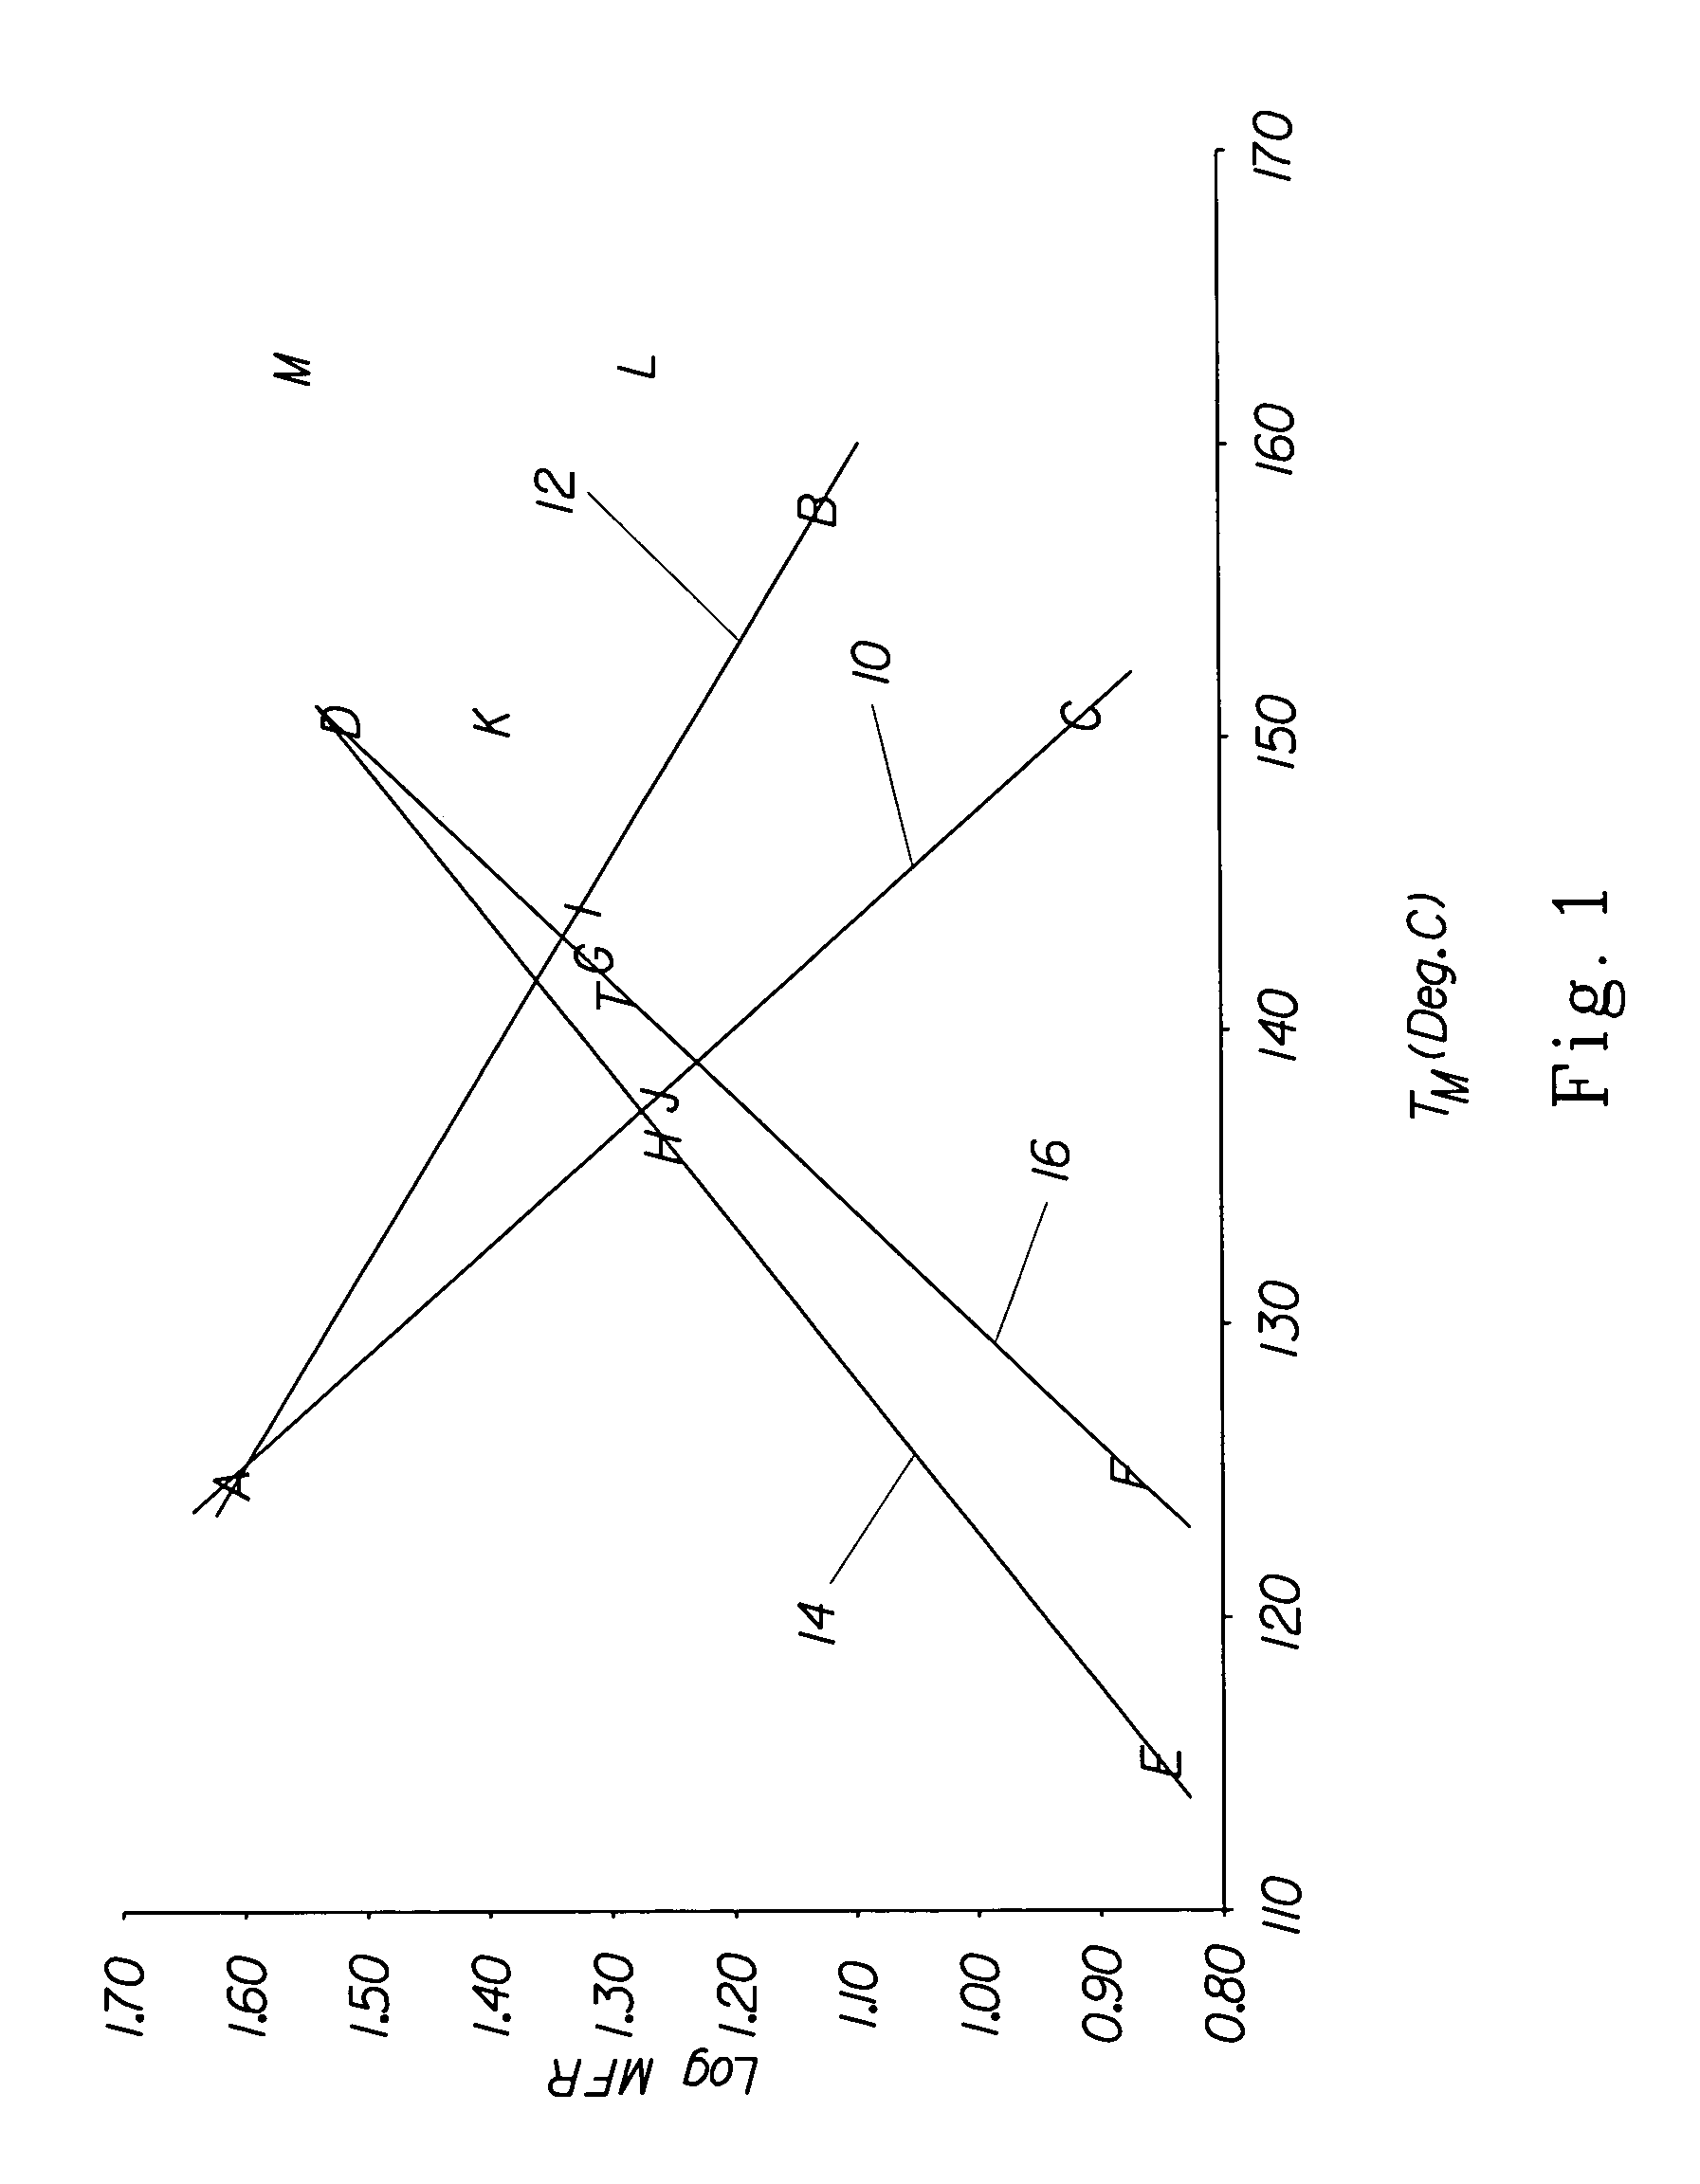 Fibers and nonwovens comprising polypropylene blends and mixtures